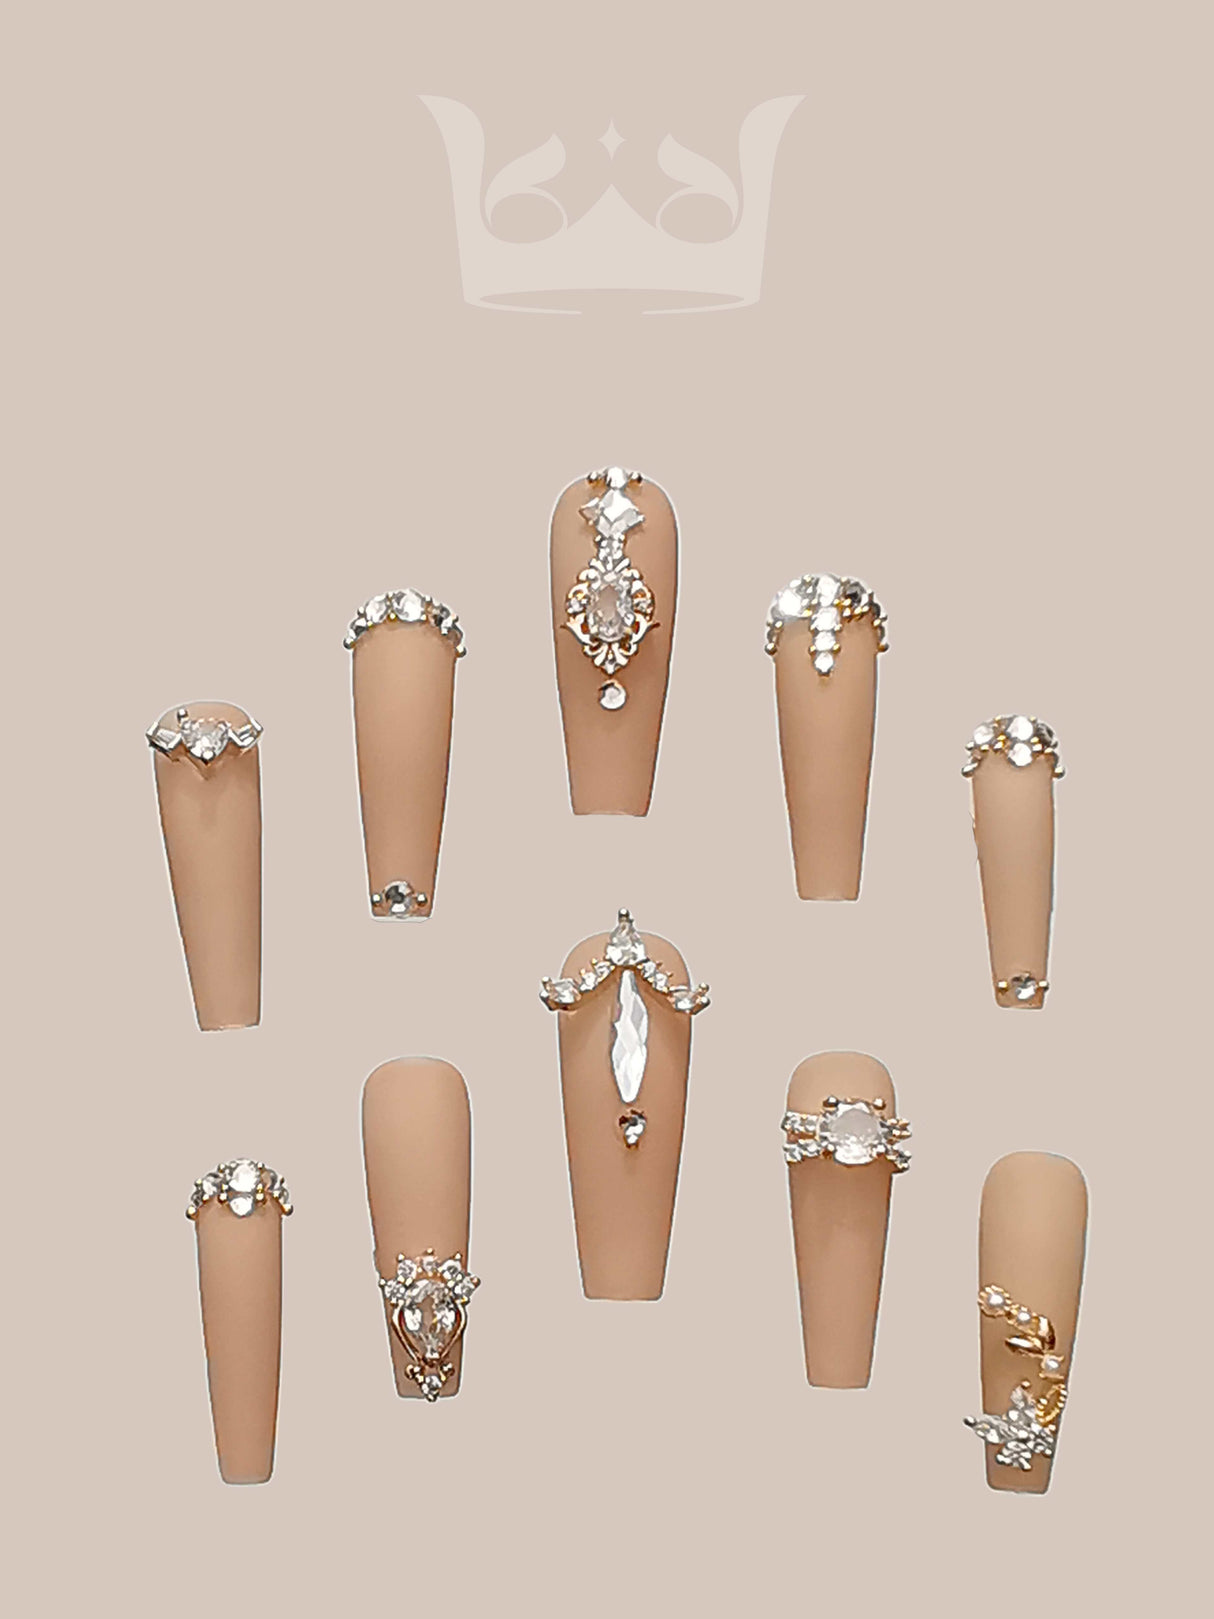 Opulent and glamorous nails with rhinestones, metallic accents, and pearls for special occasions. Neutral polish provides a subtle backdrop for the ornate decorations.